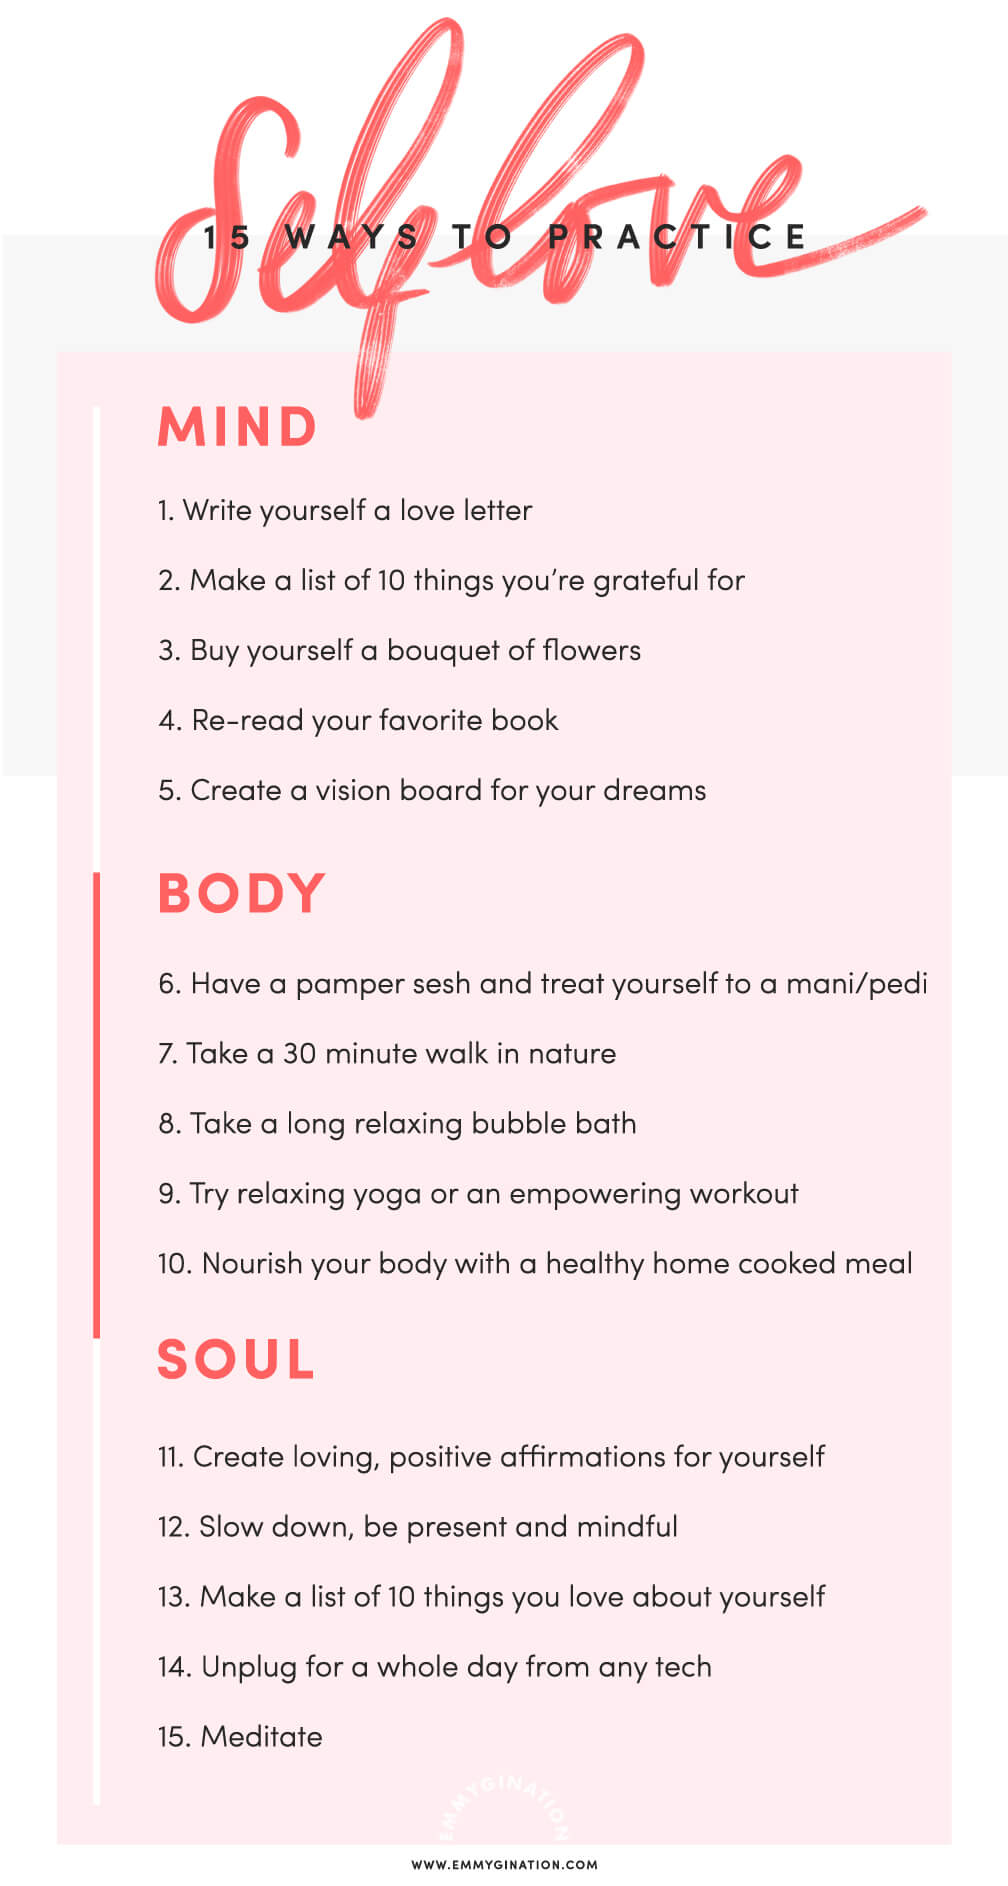 Loving yourself can be very challenging for some of us especially when we're hit with anxiety. aHere are 15 ways you can practice self love and care.